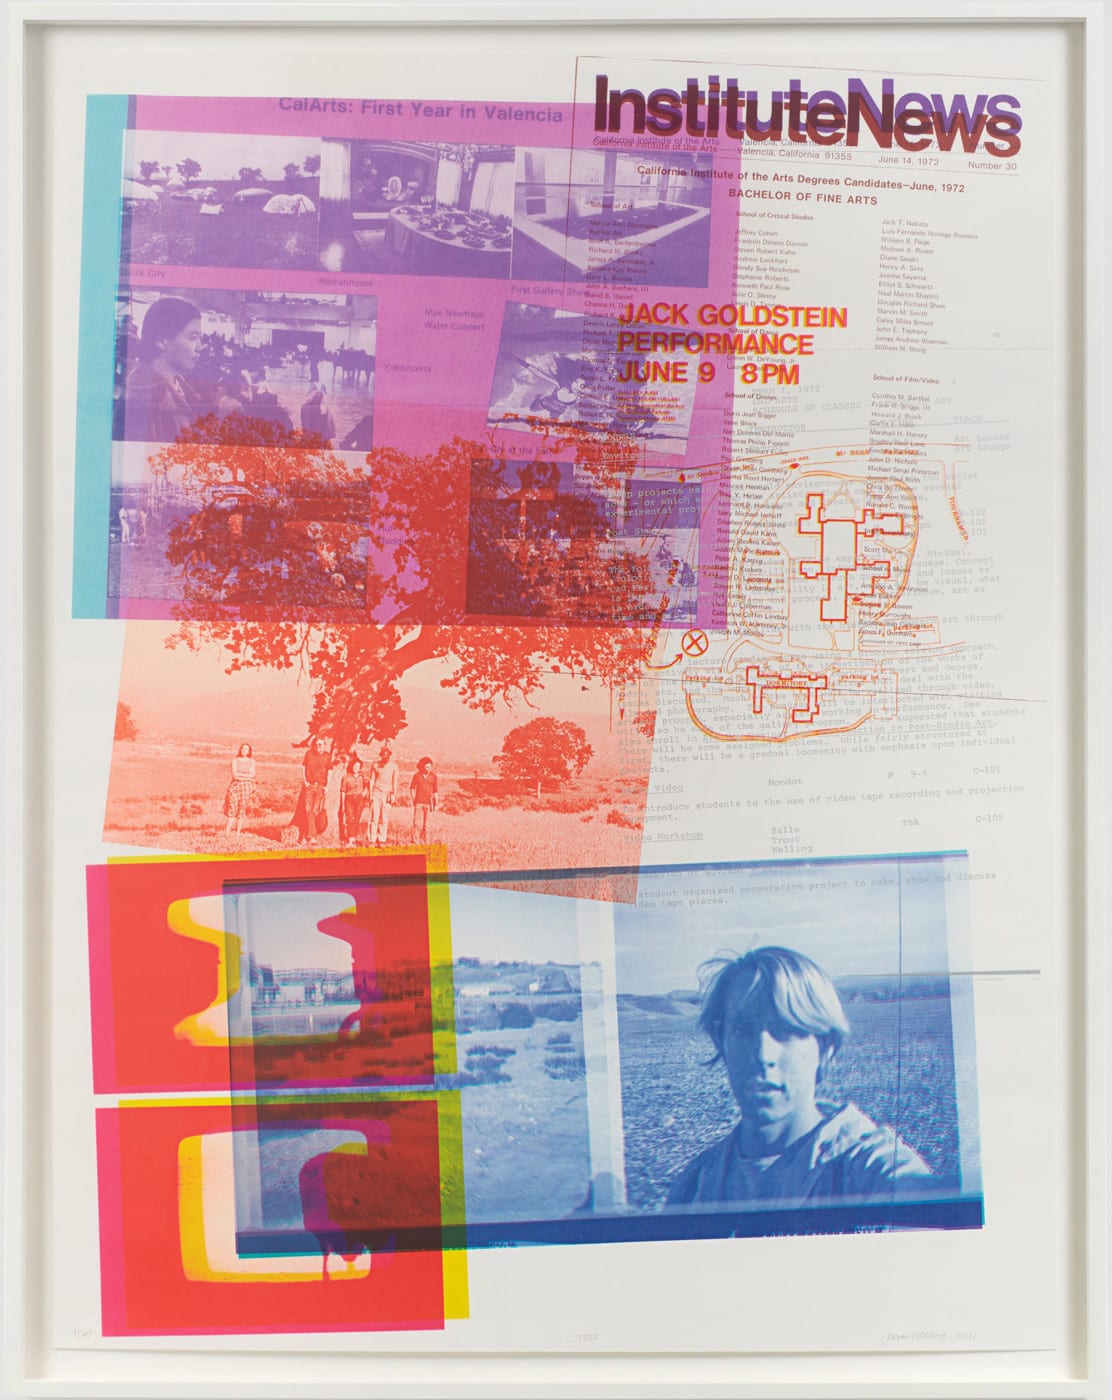 Artwork by James Welling (CalArts ’72 and ’74)